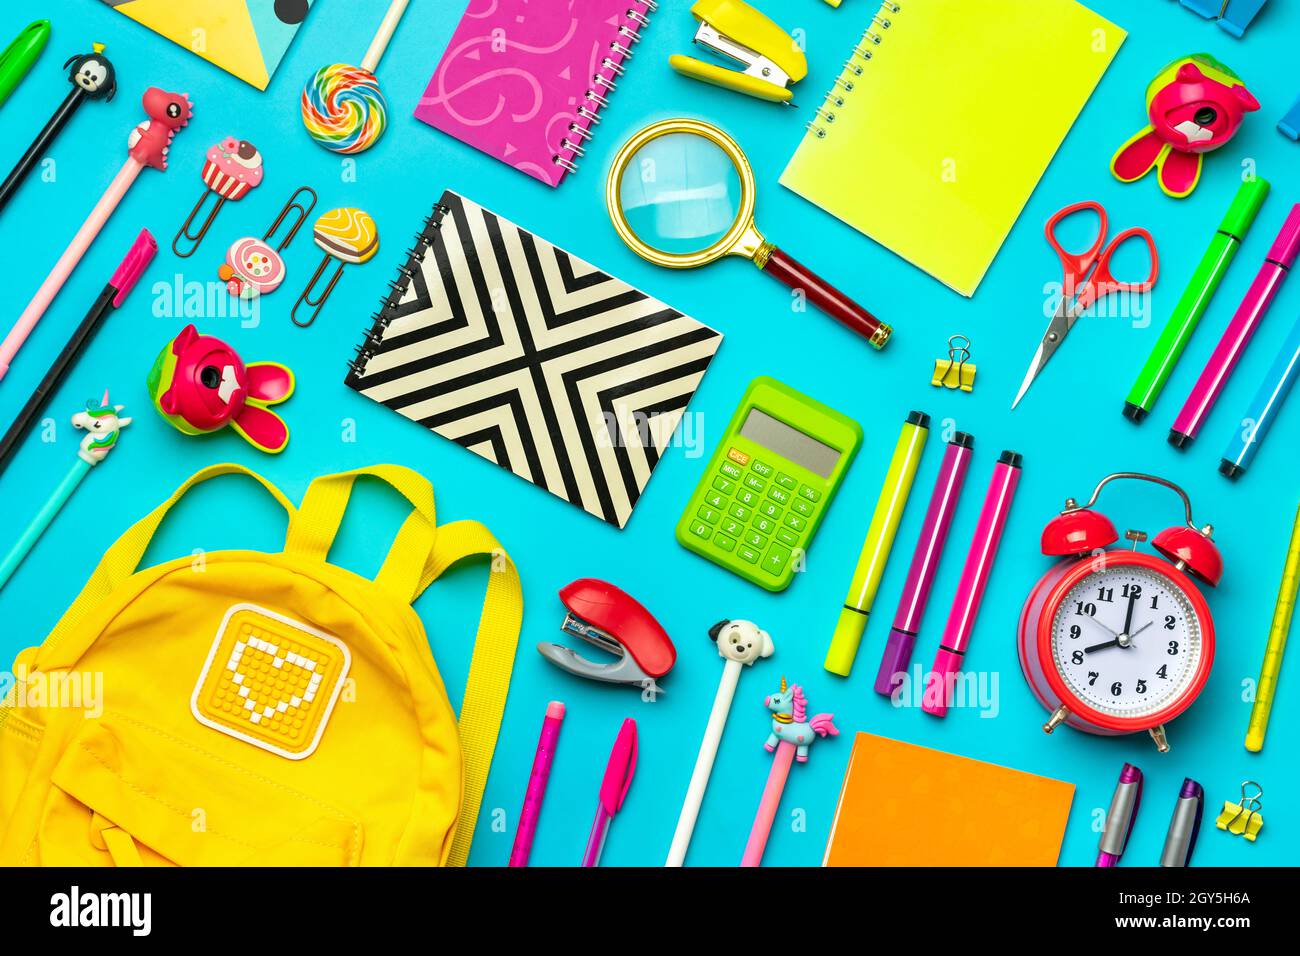 Frame from school and office supplies Paper clips, scissors, pens, felt-tip pens, sharpener, calculator, stapler isolated on blue background Flat lay Stock Photo